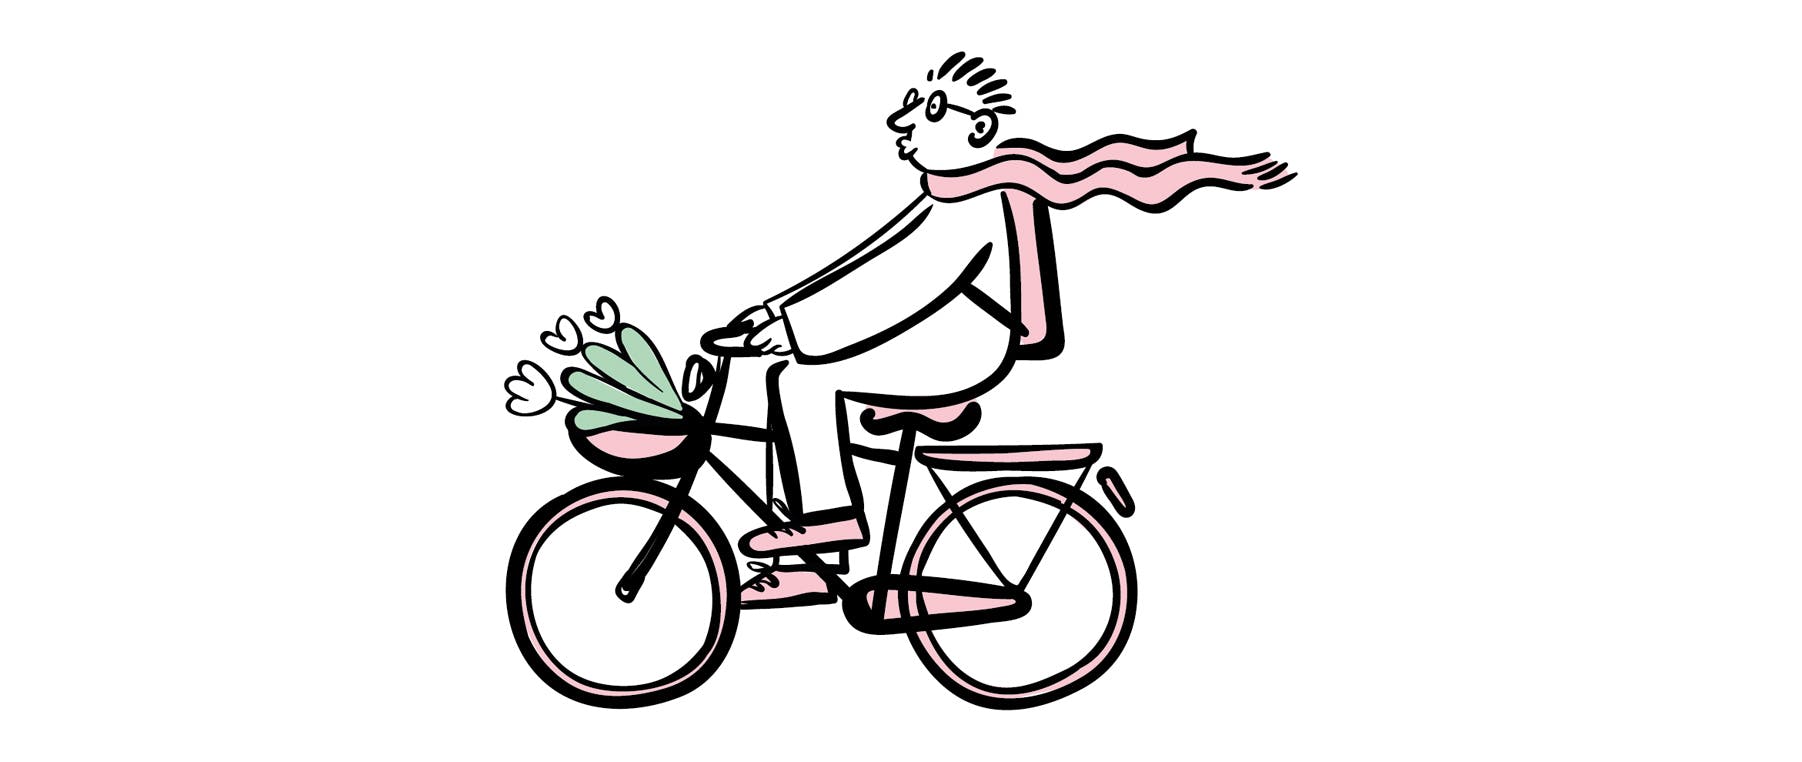 person on a bike with tulips in the basket and flying scarf